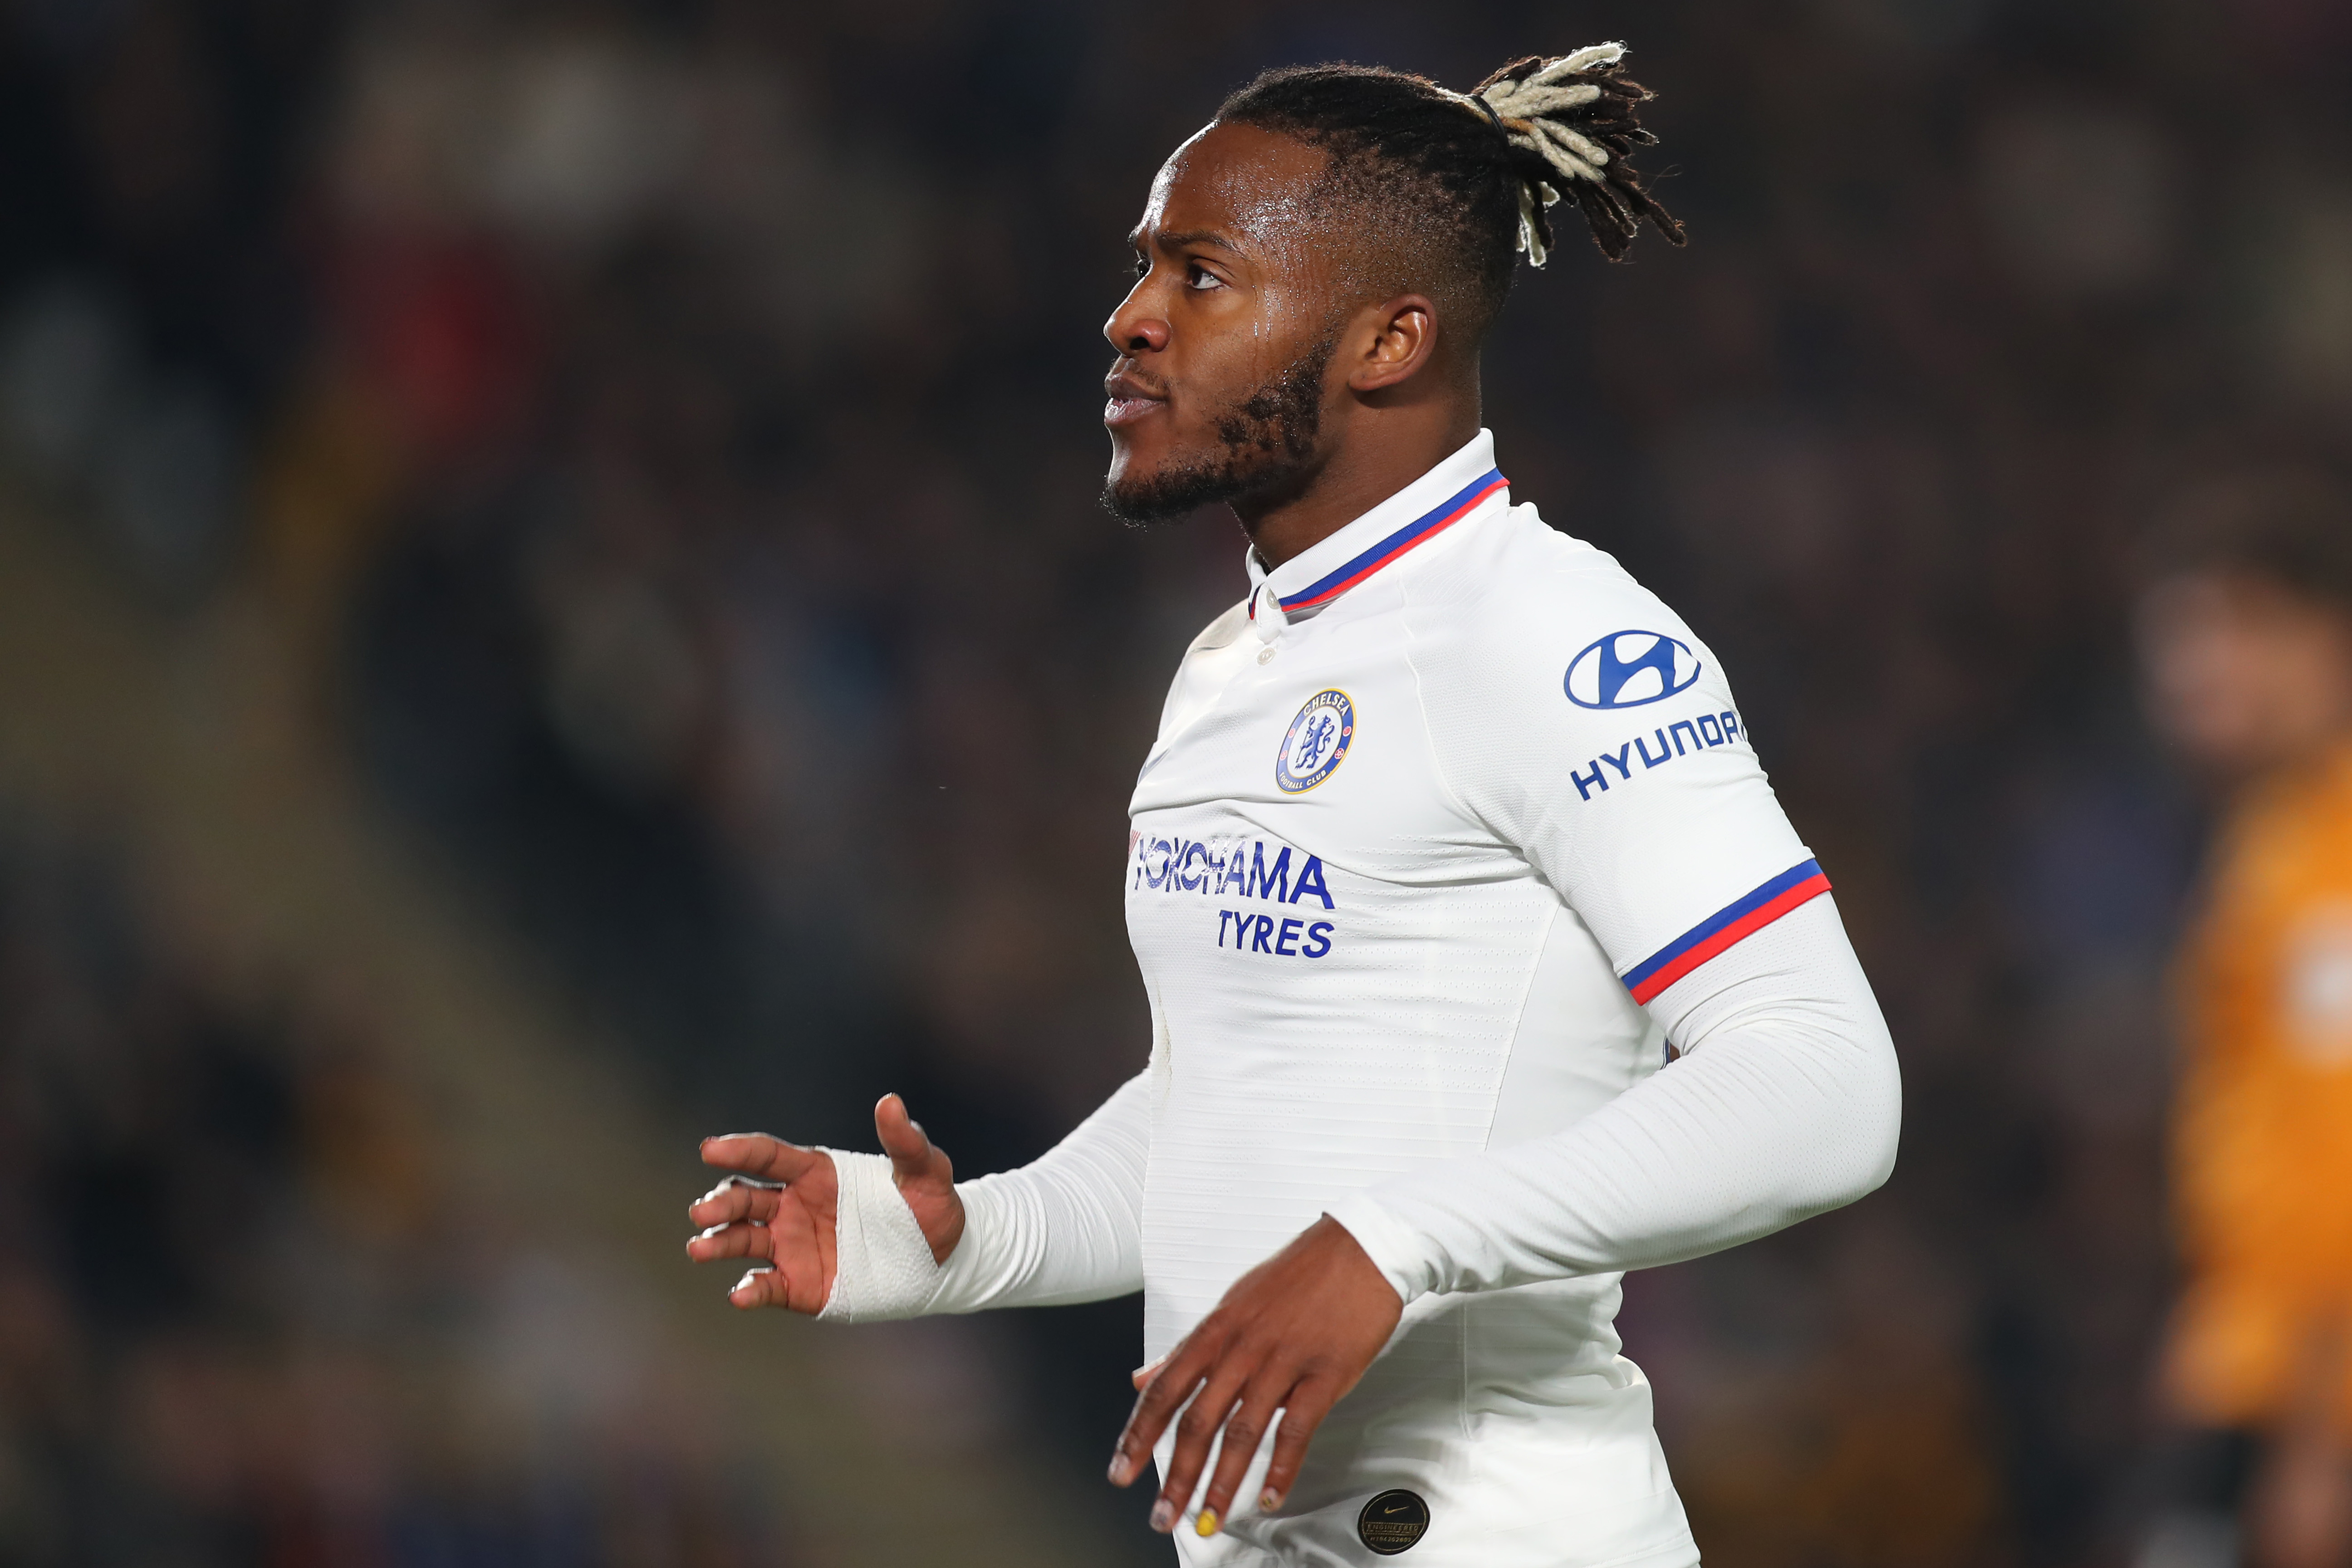 Batshuayi opened the scoring for Chelsea (Photo by Ashley Allen/Getty Images)